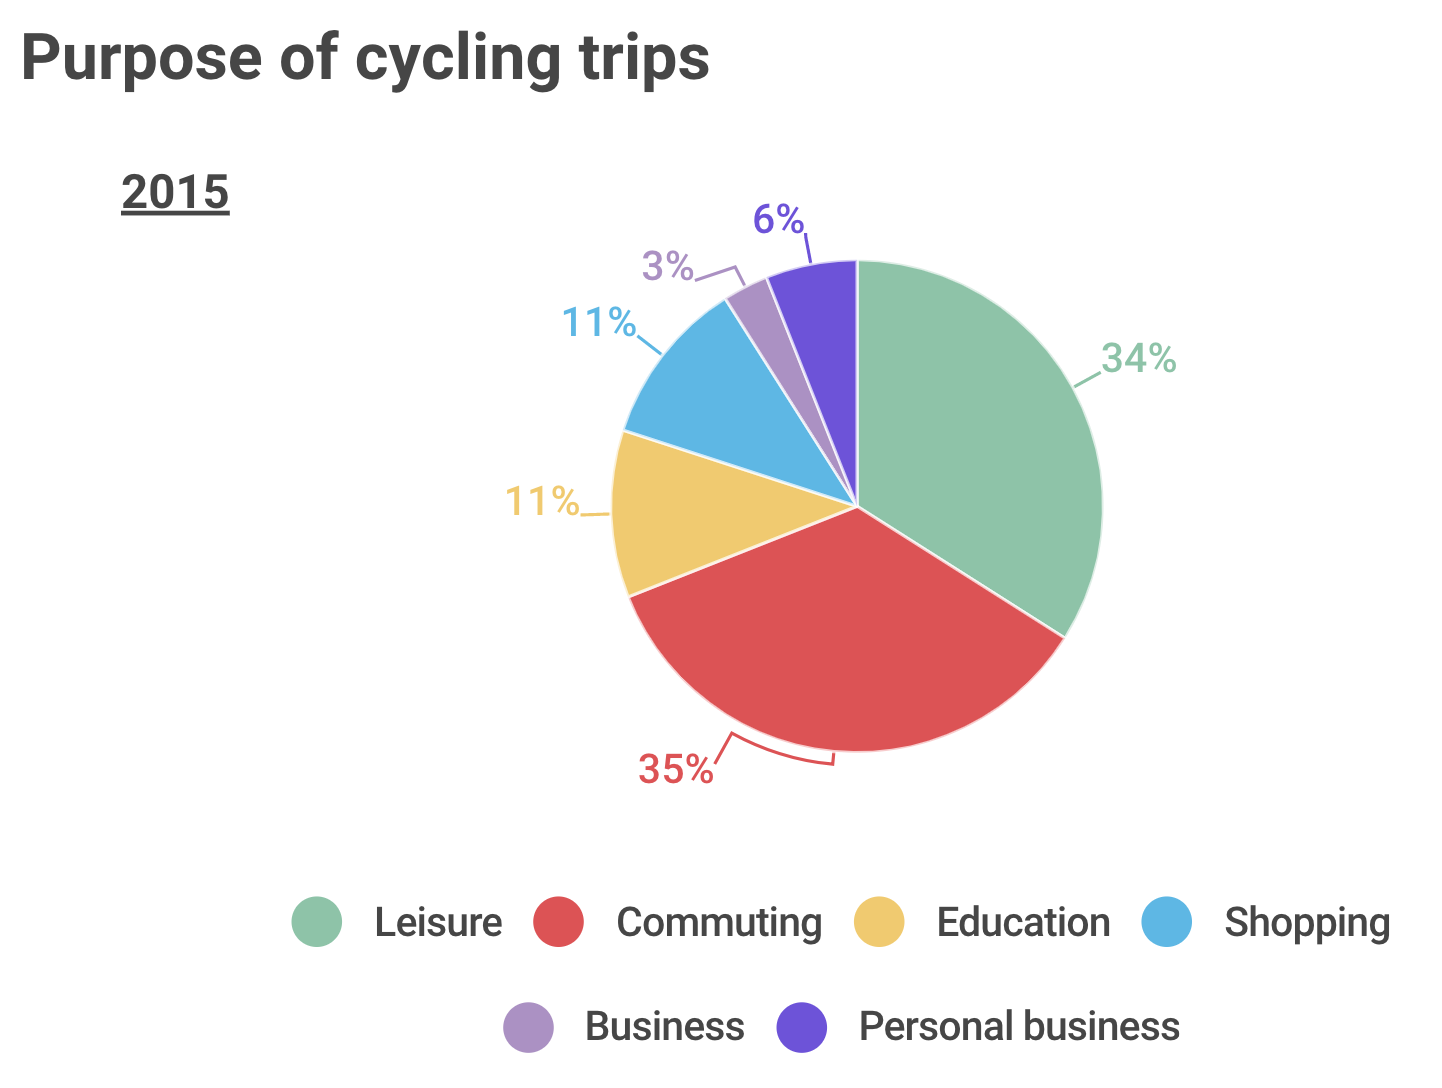 Purpose of Cycling Trips 2015